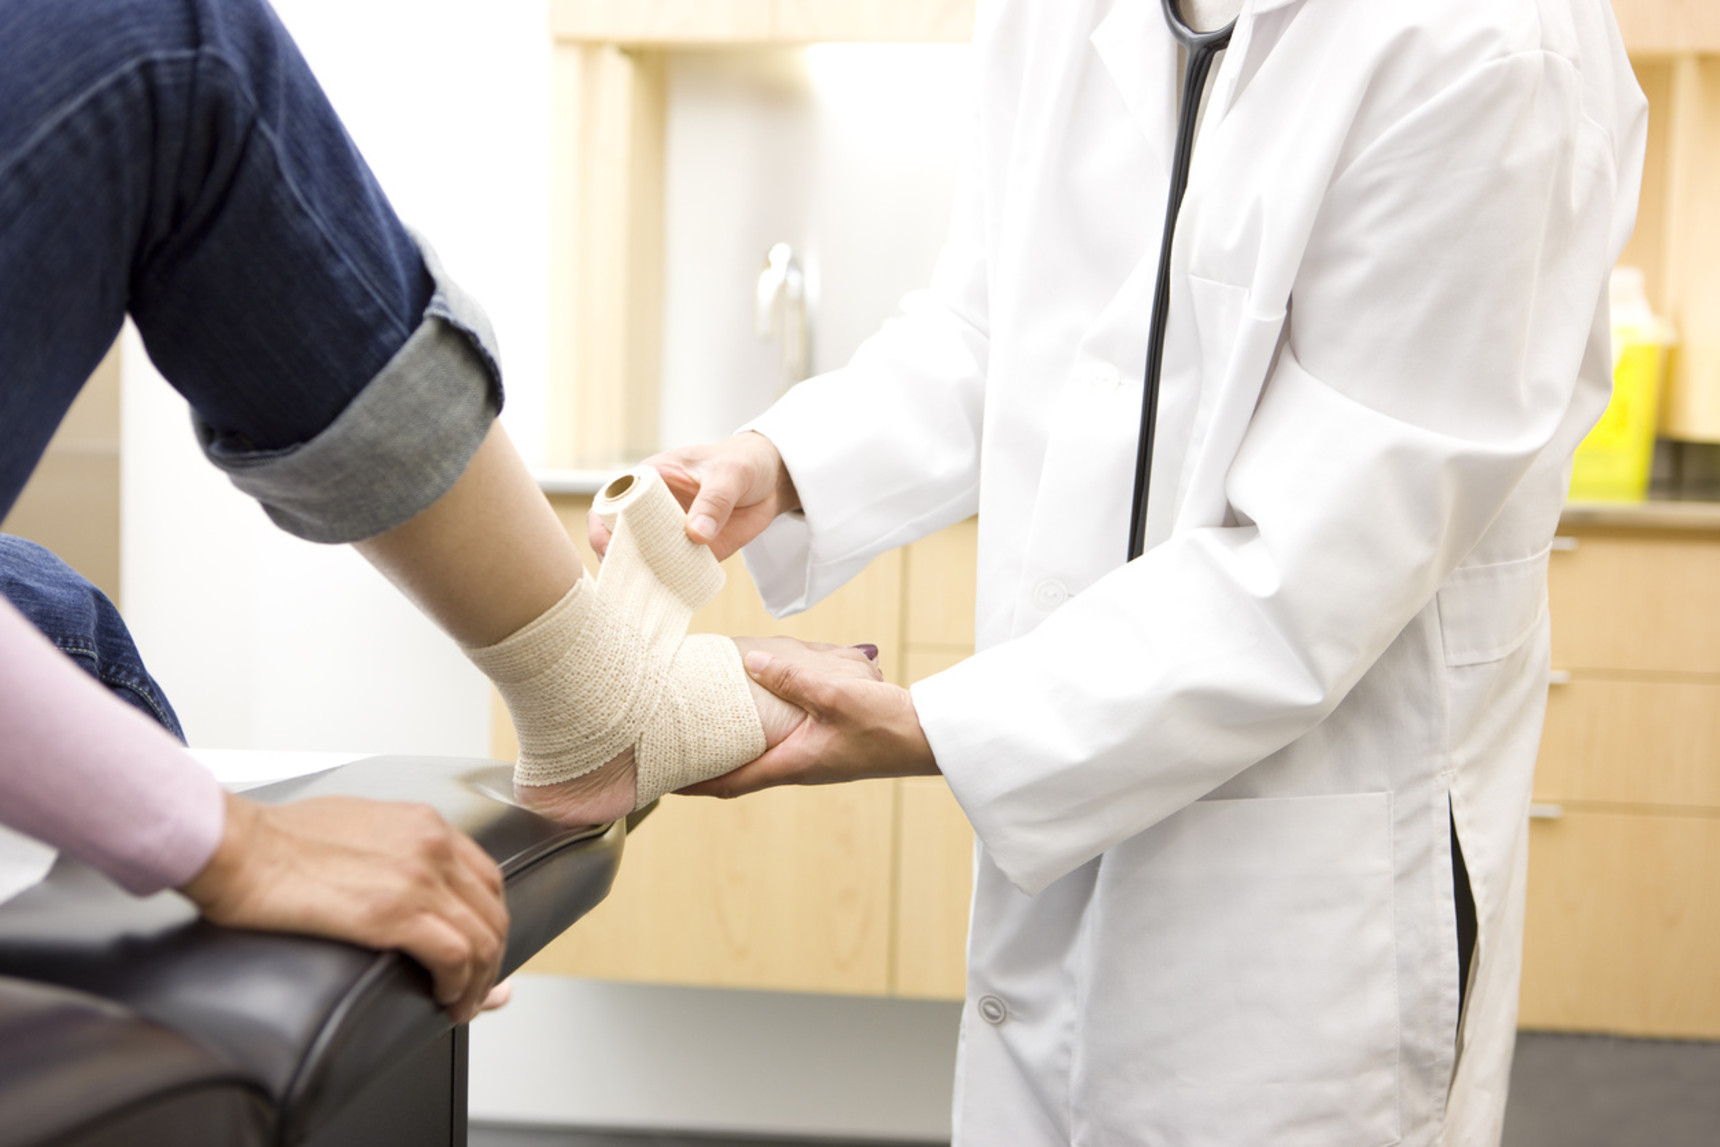 Benefits of Opting For Orthotic Equipment at an Early Stage of Injury